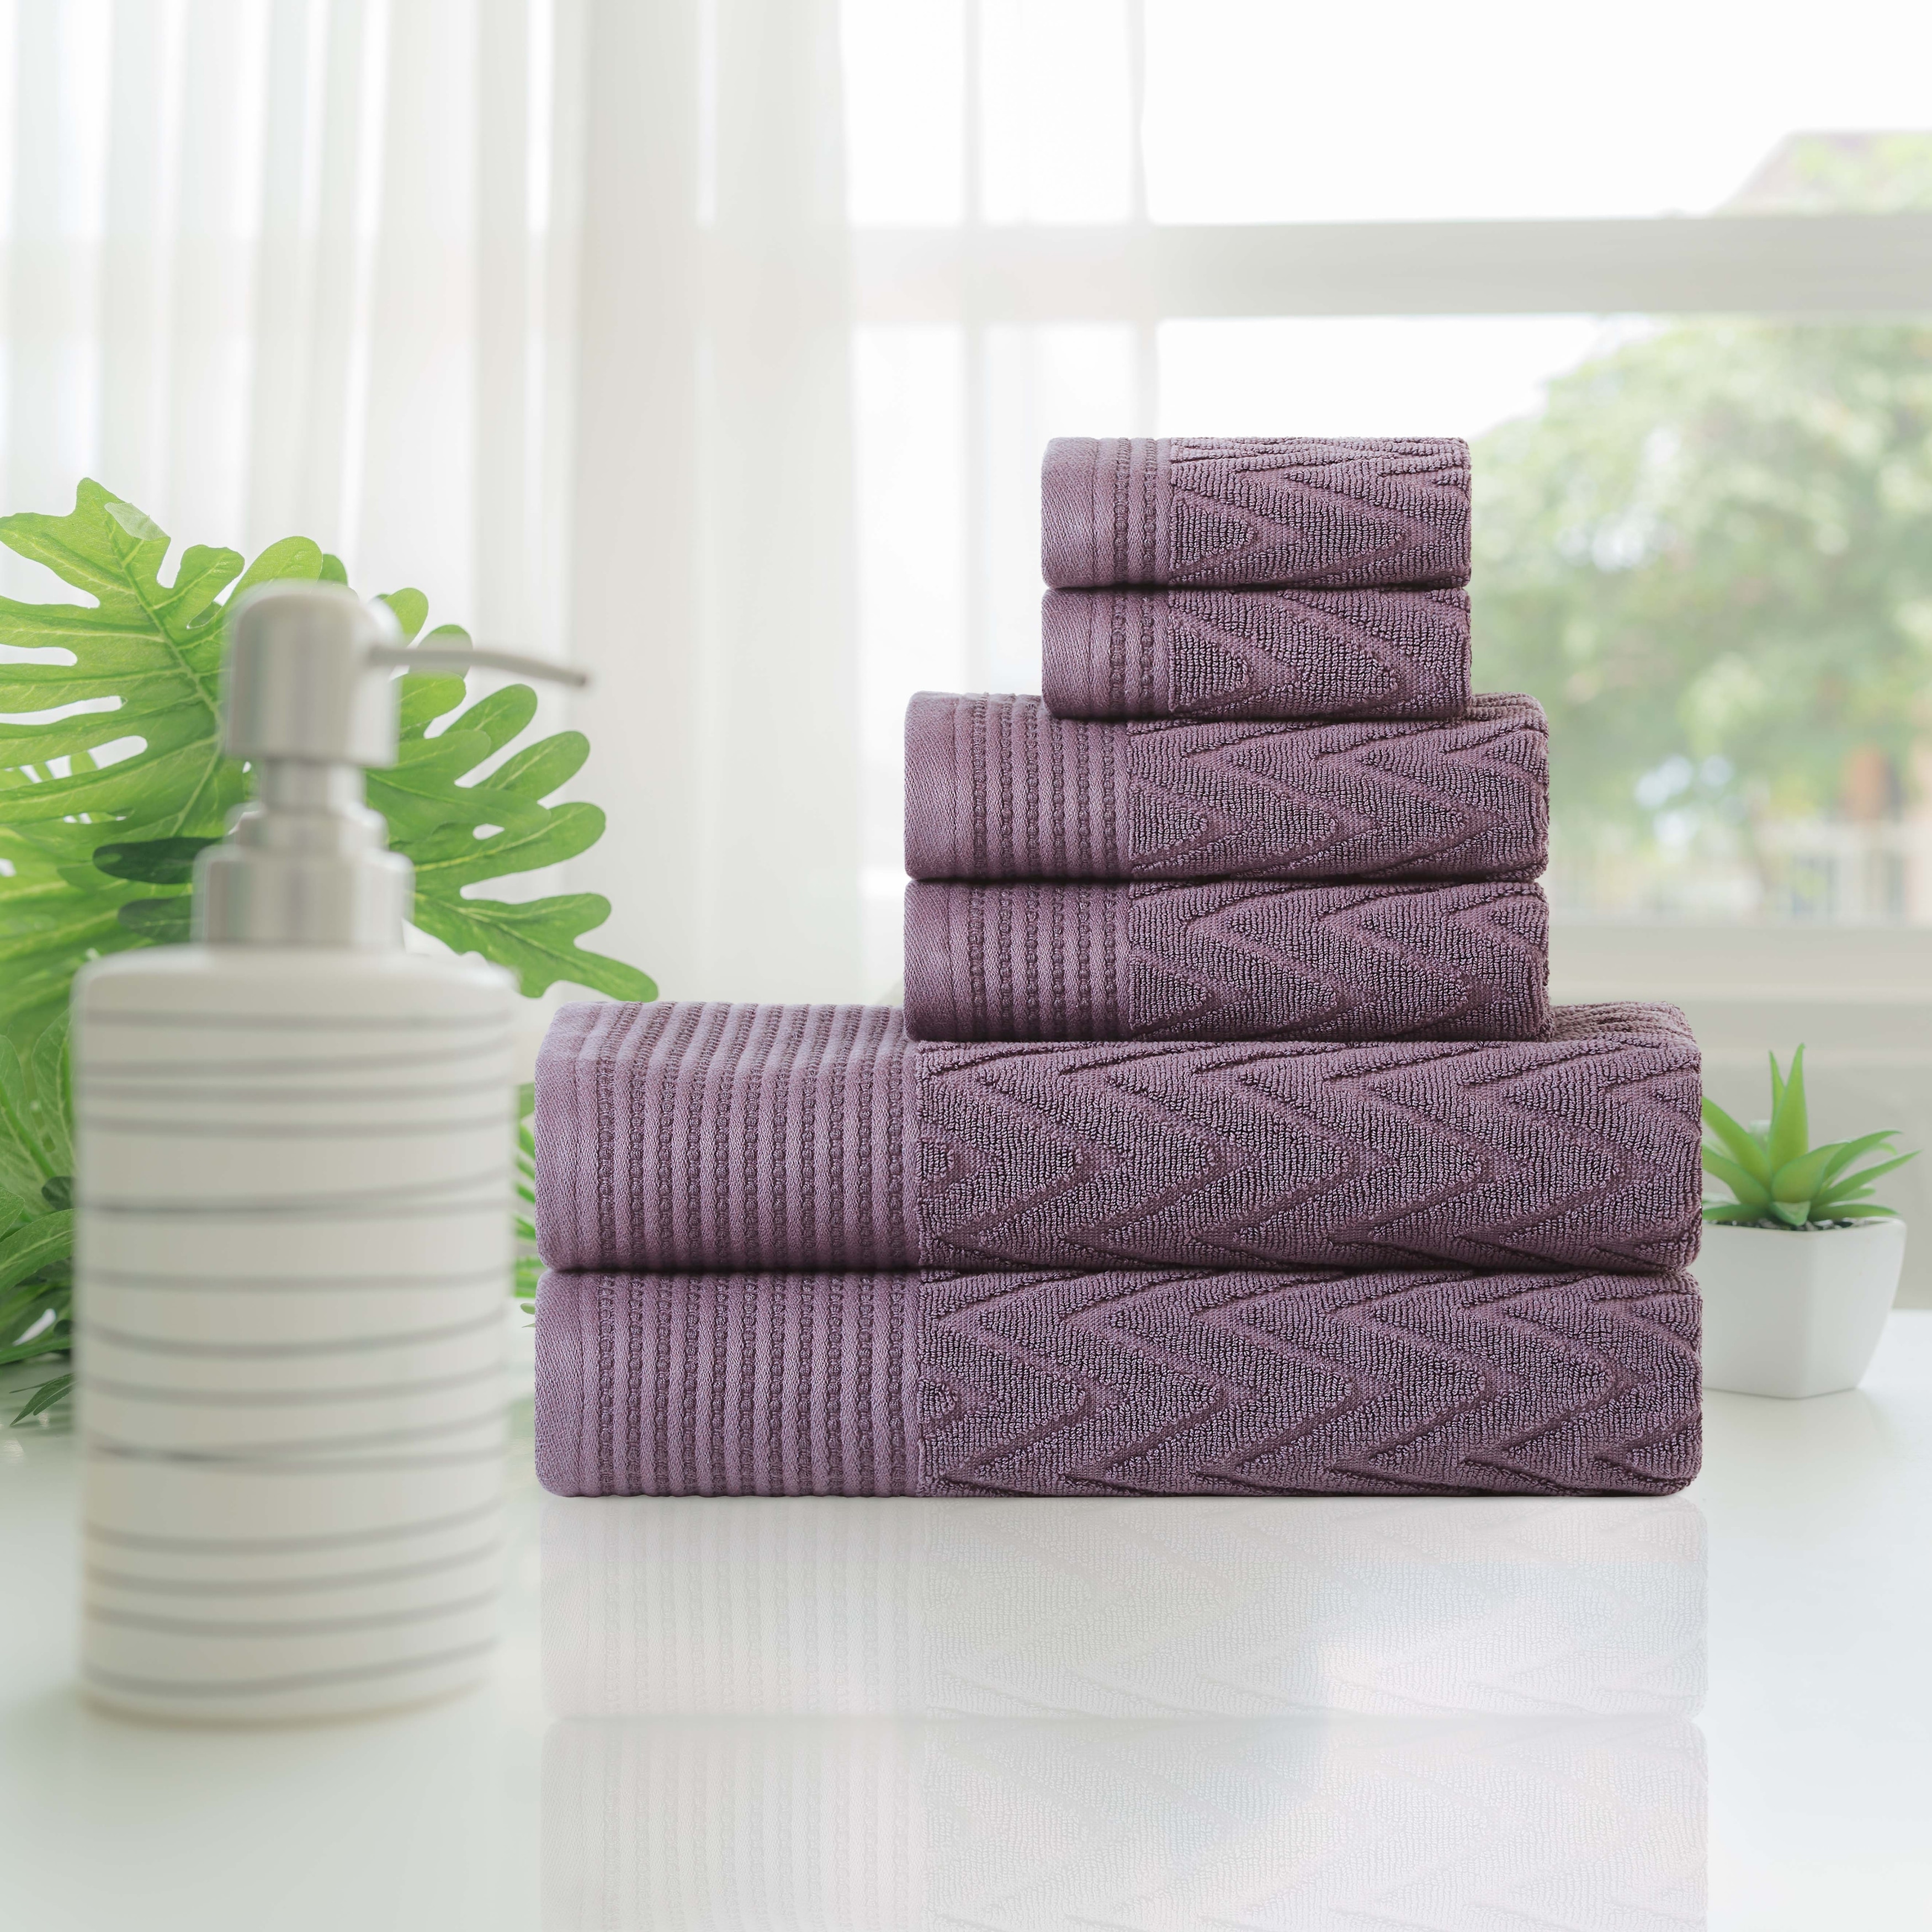 https://ak1.ostkcdn.com/images/products/is/images/direct/442240aaee90cccd1caf6e068ea51bcc05fa046f/Superior-Chevron-Zero-Twist-Solid-and-Jacquard-Cotton-6-Piece-Towel-Set.jpg